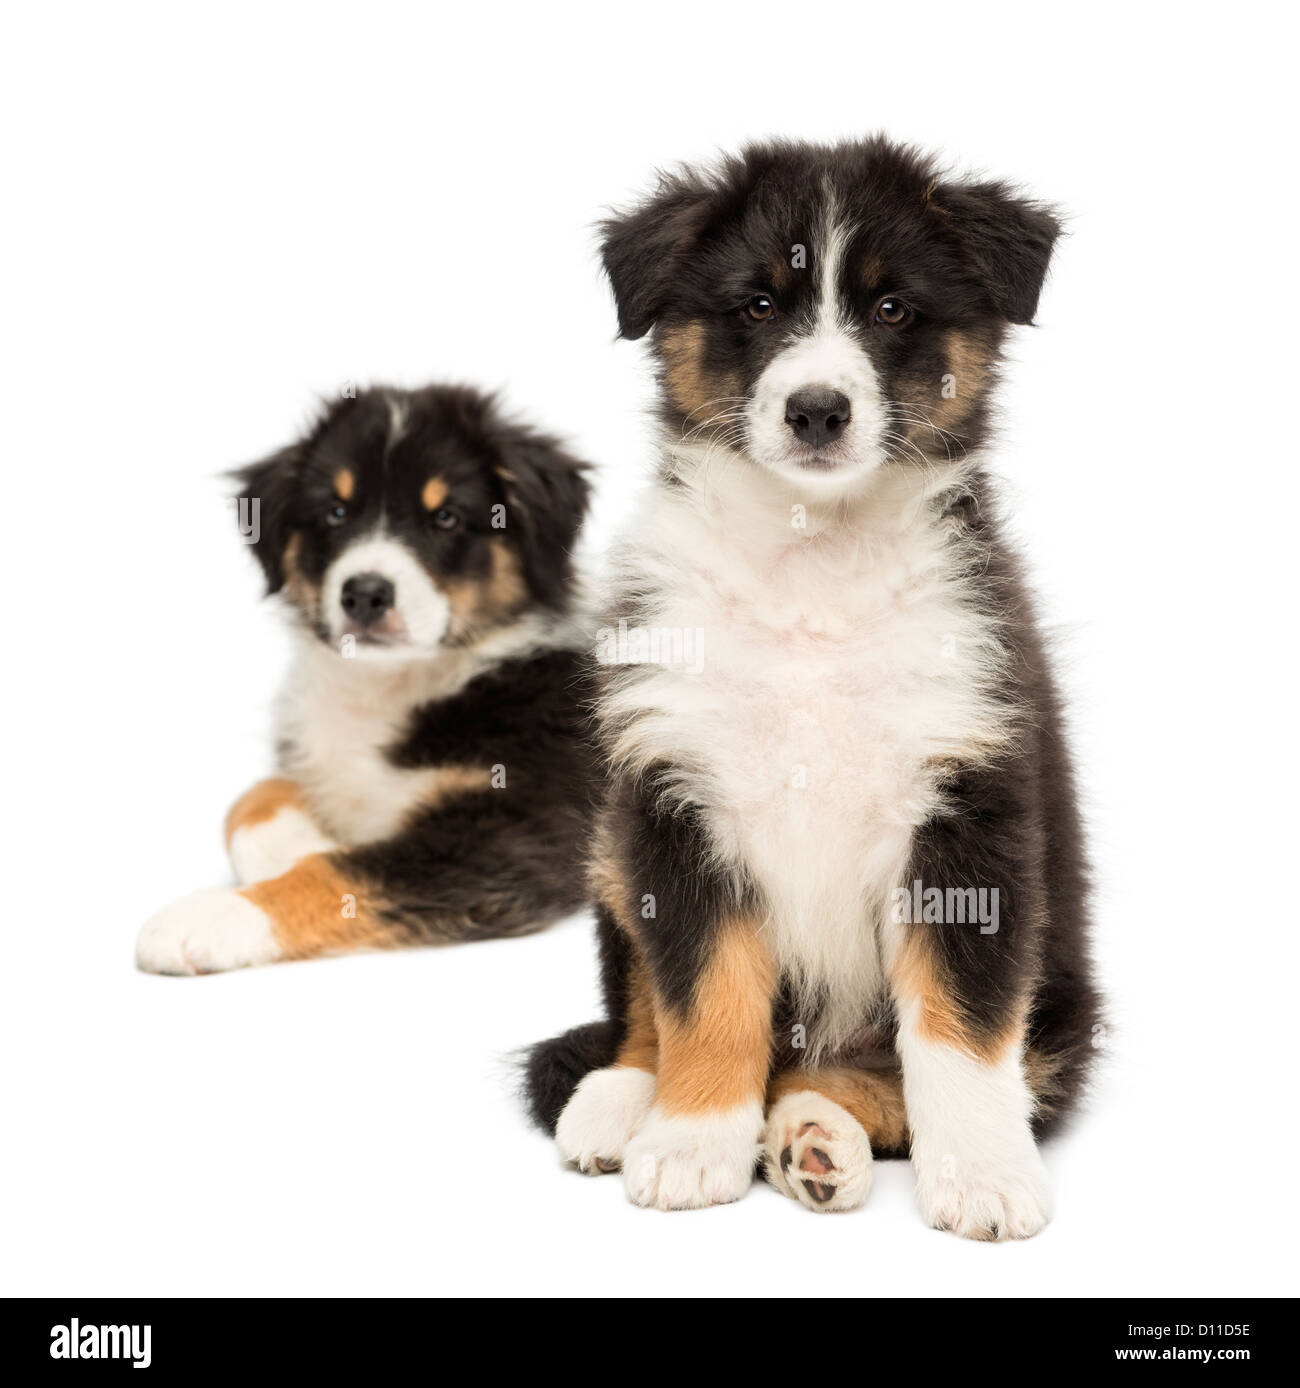 Two Australian Shepherd puppies, 2 months old, sitting with focus on foreground against white background Stock Photo